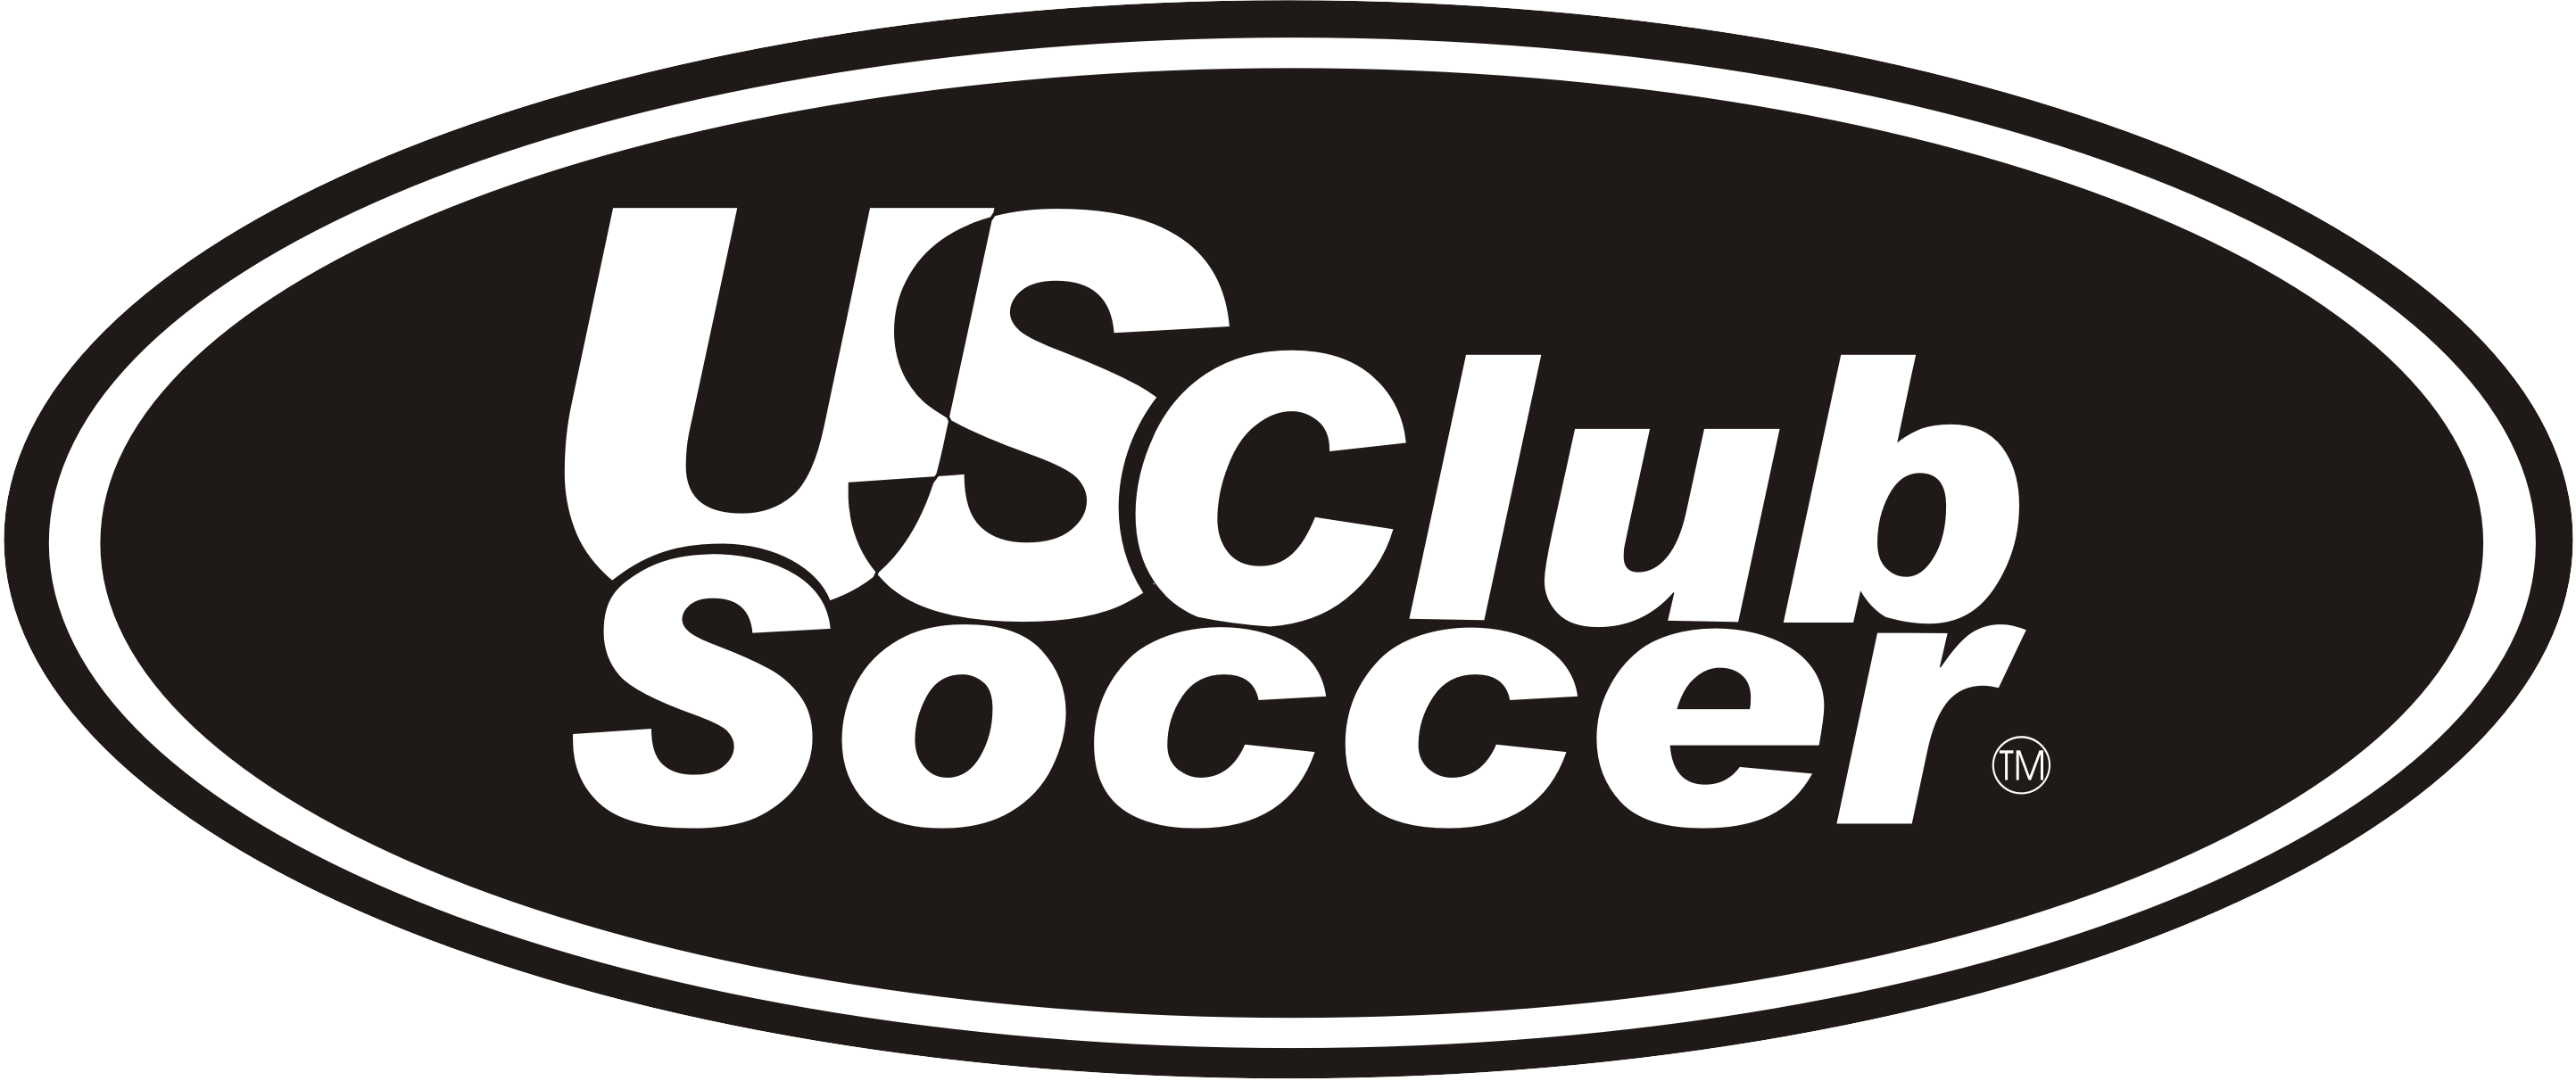 LOGO - US Club Soccer - Oval.png